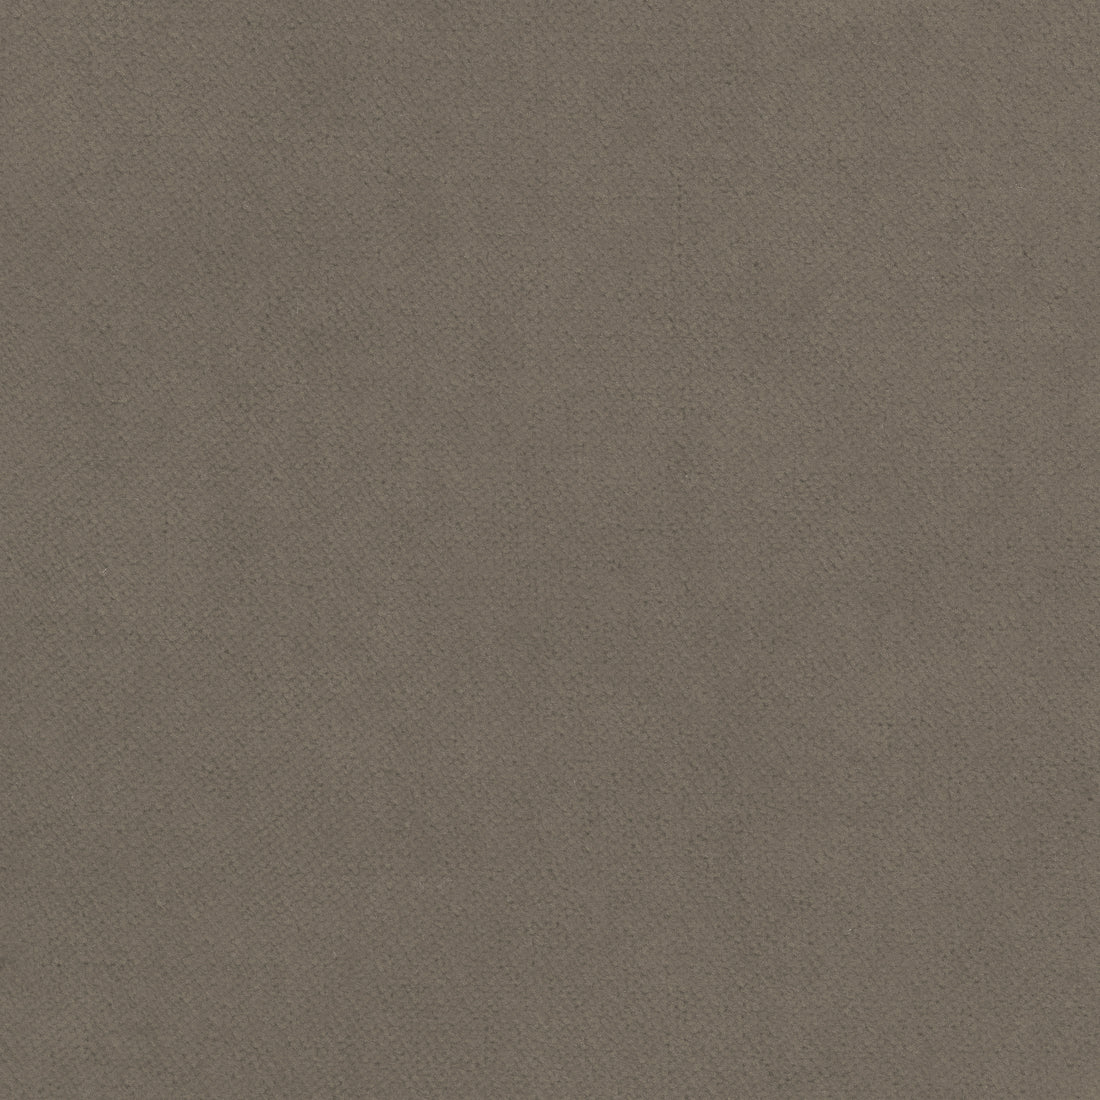 Club Velvet fabric in smoke color - pattern number W7221 - by Thibaut in the Club Velvet collection